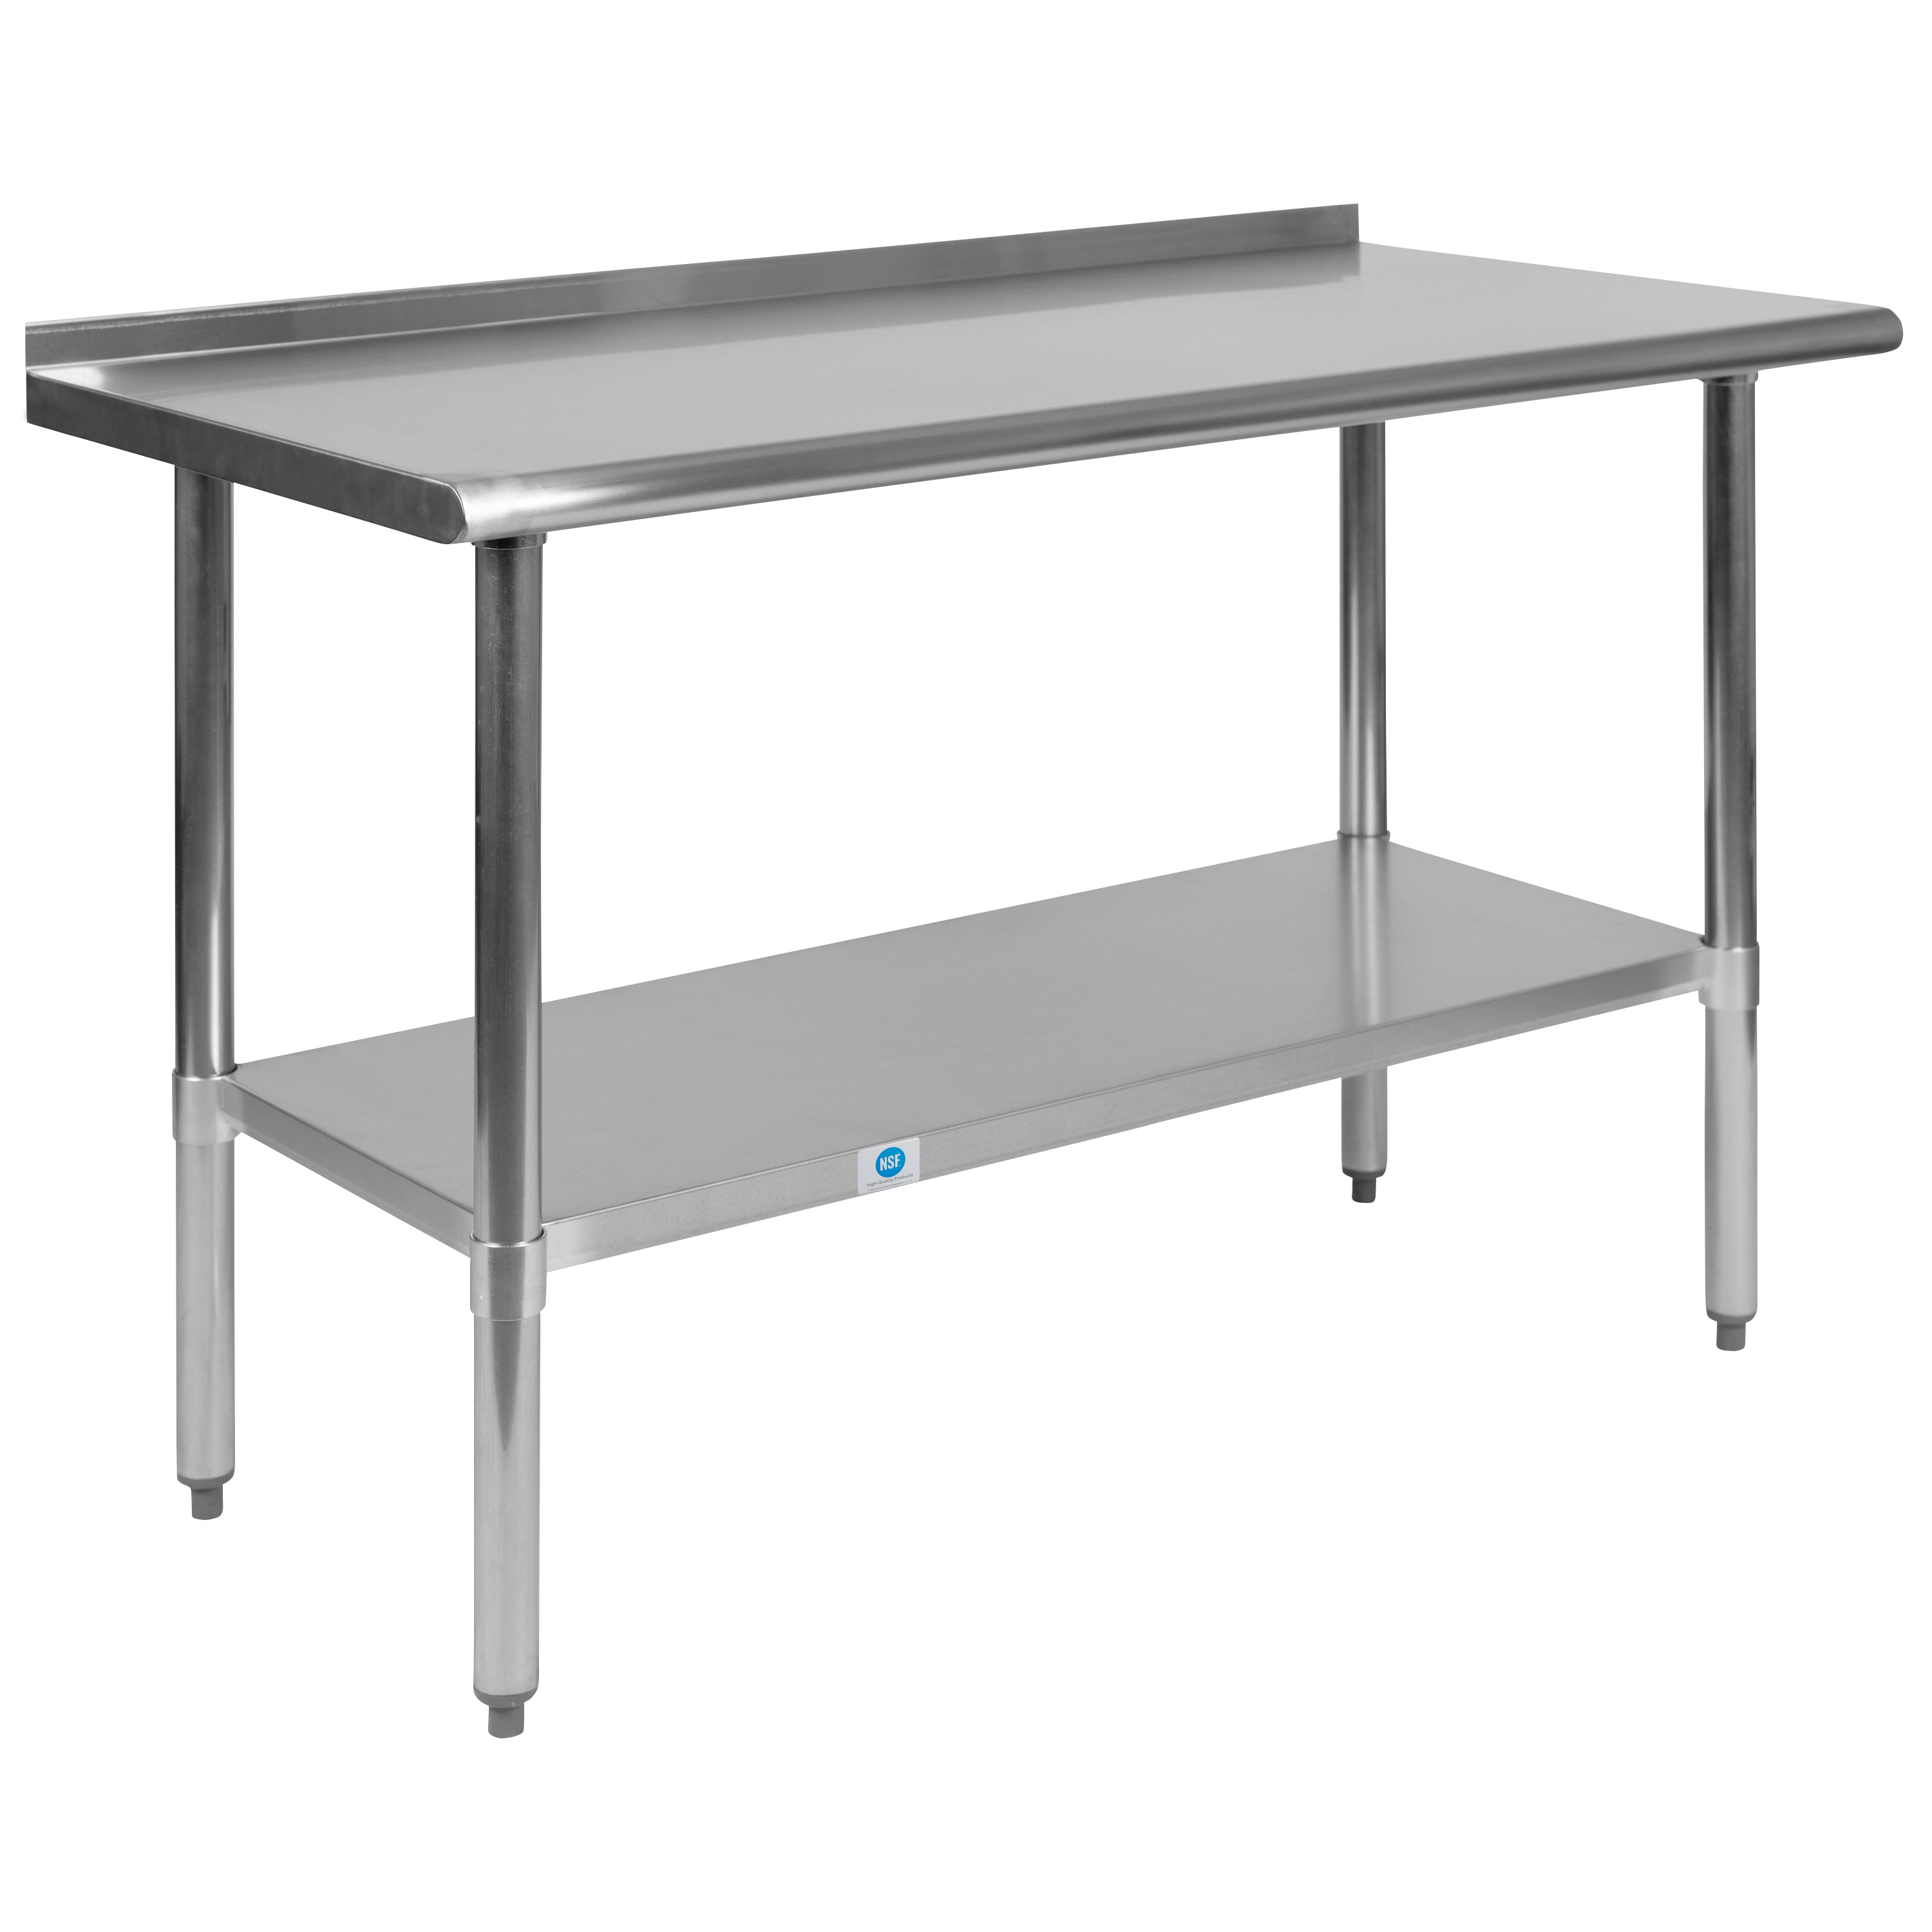 Flash Furniture NH-WT-2448BSP-GG Stainless Steel 18 Gauge Work Table with 1.5" Backsplash and Undershelf, 48"W x 24"D x 36"H